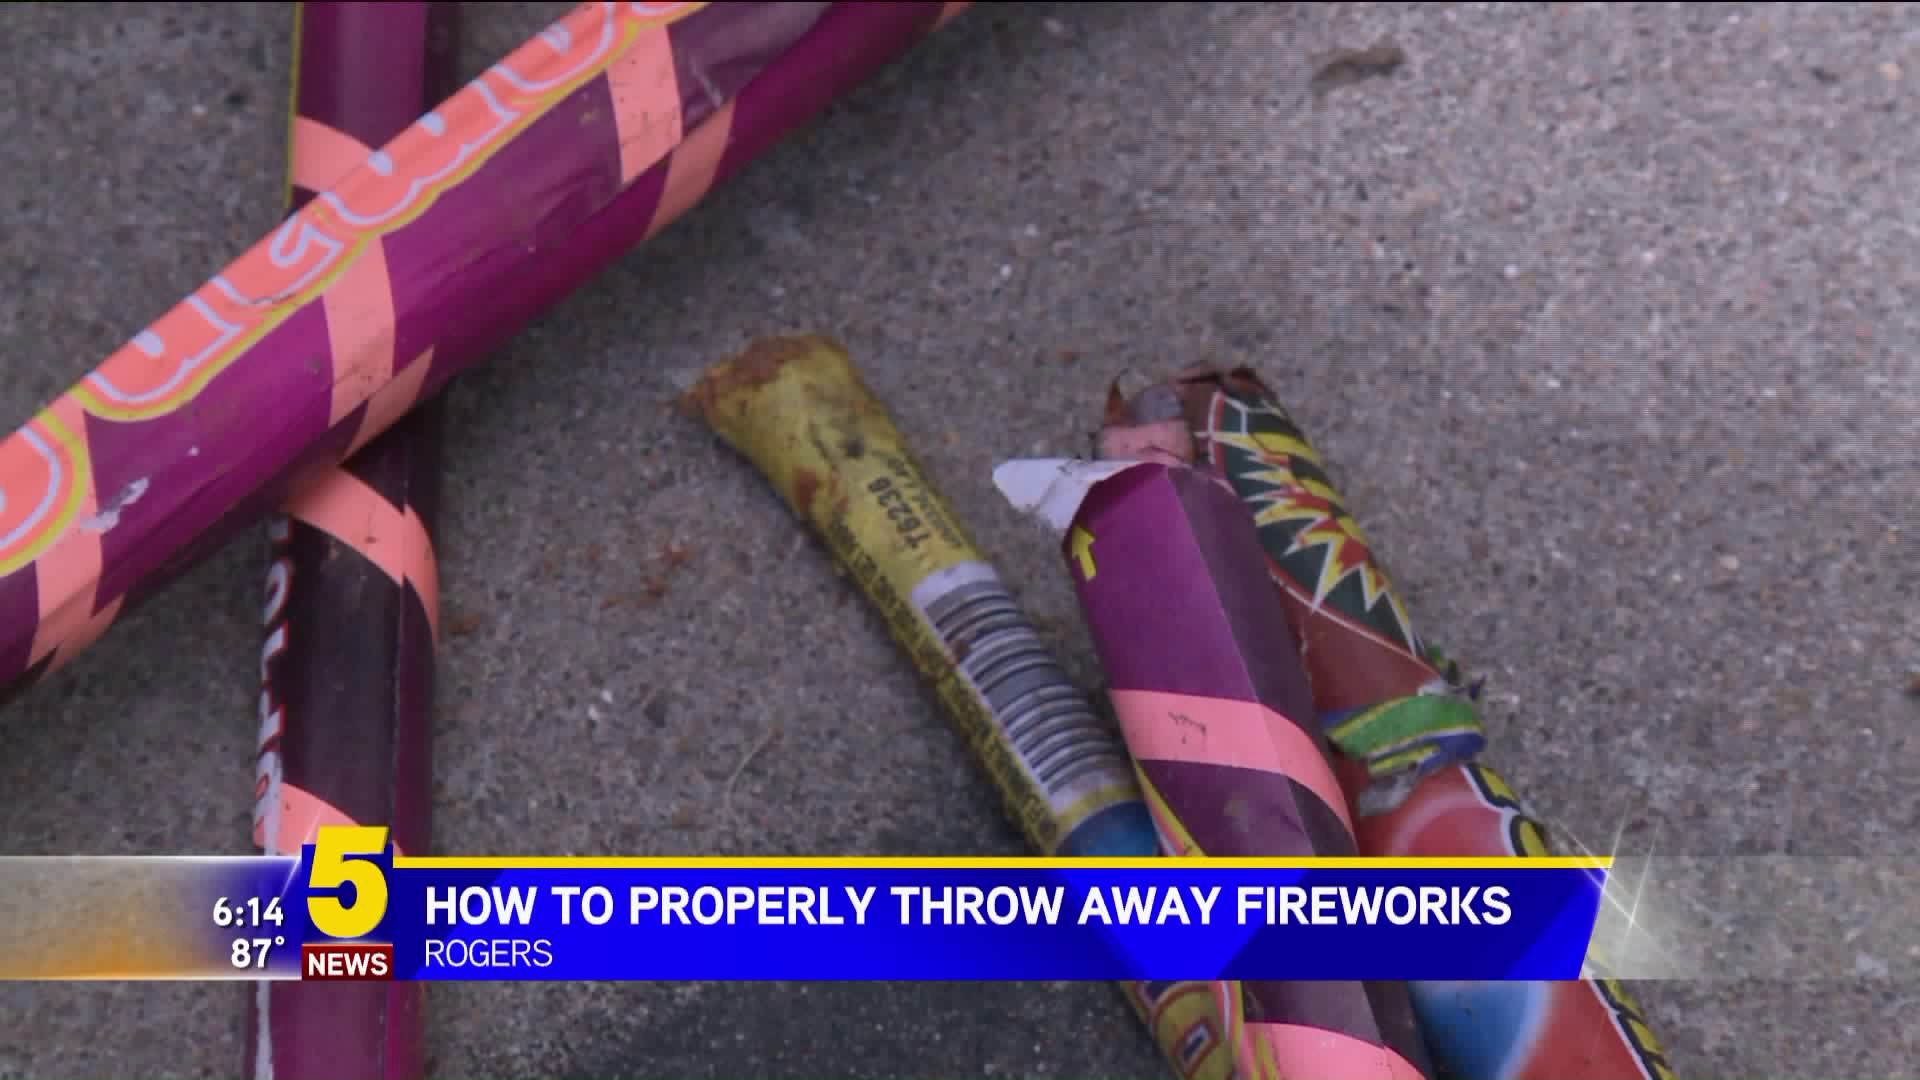 How To Properly Throw Away Fireworks